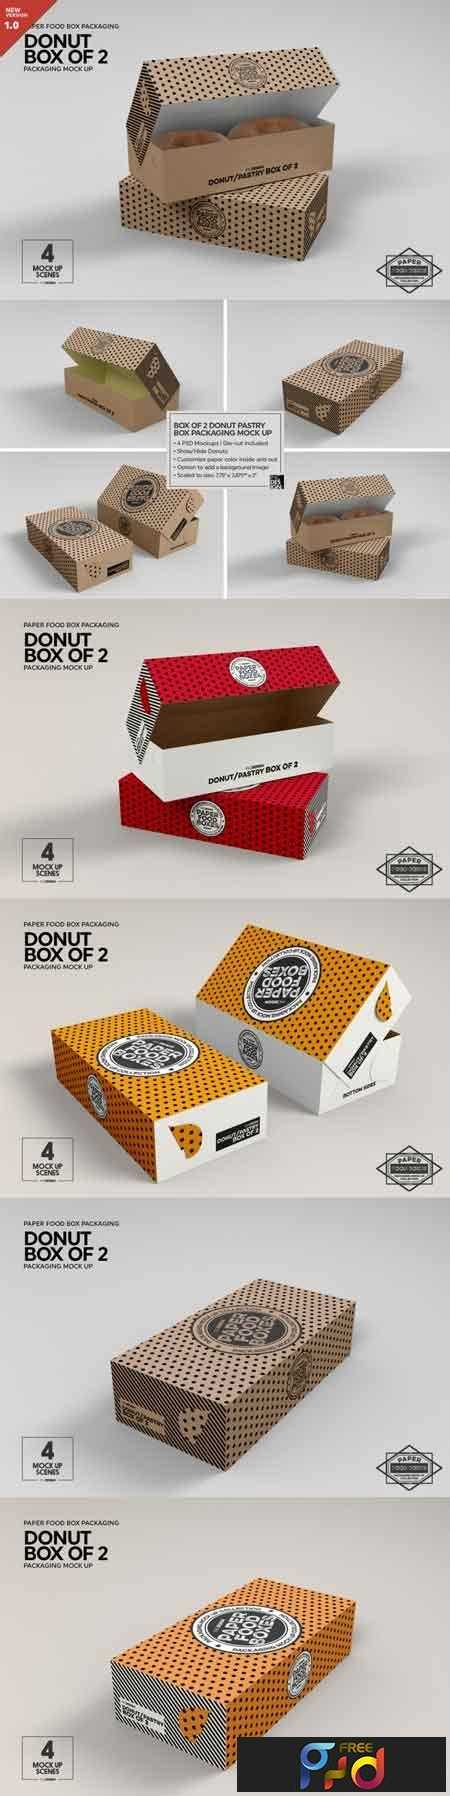 Download 1812179 Box of Two Donut Pastry Box Mockup 3485014 - FreePSDvn